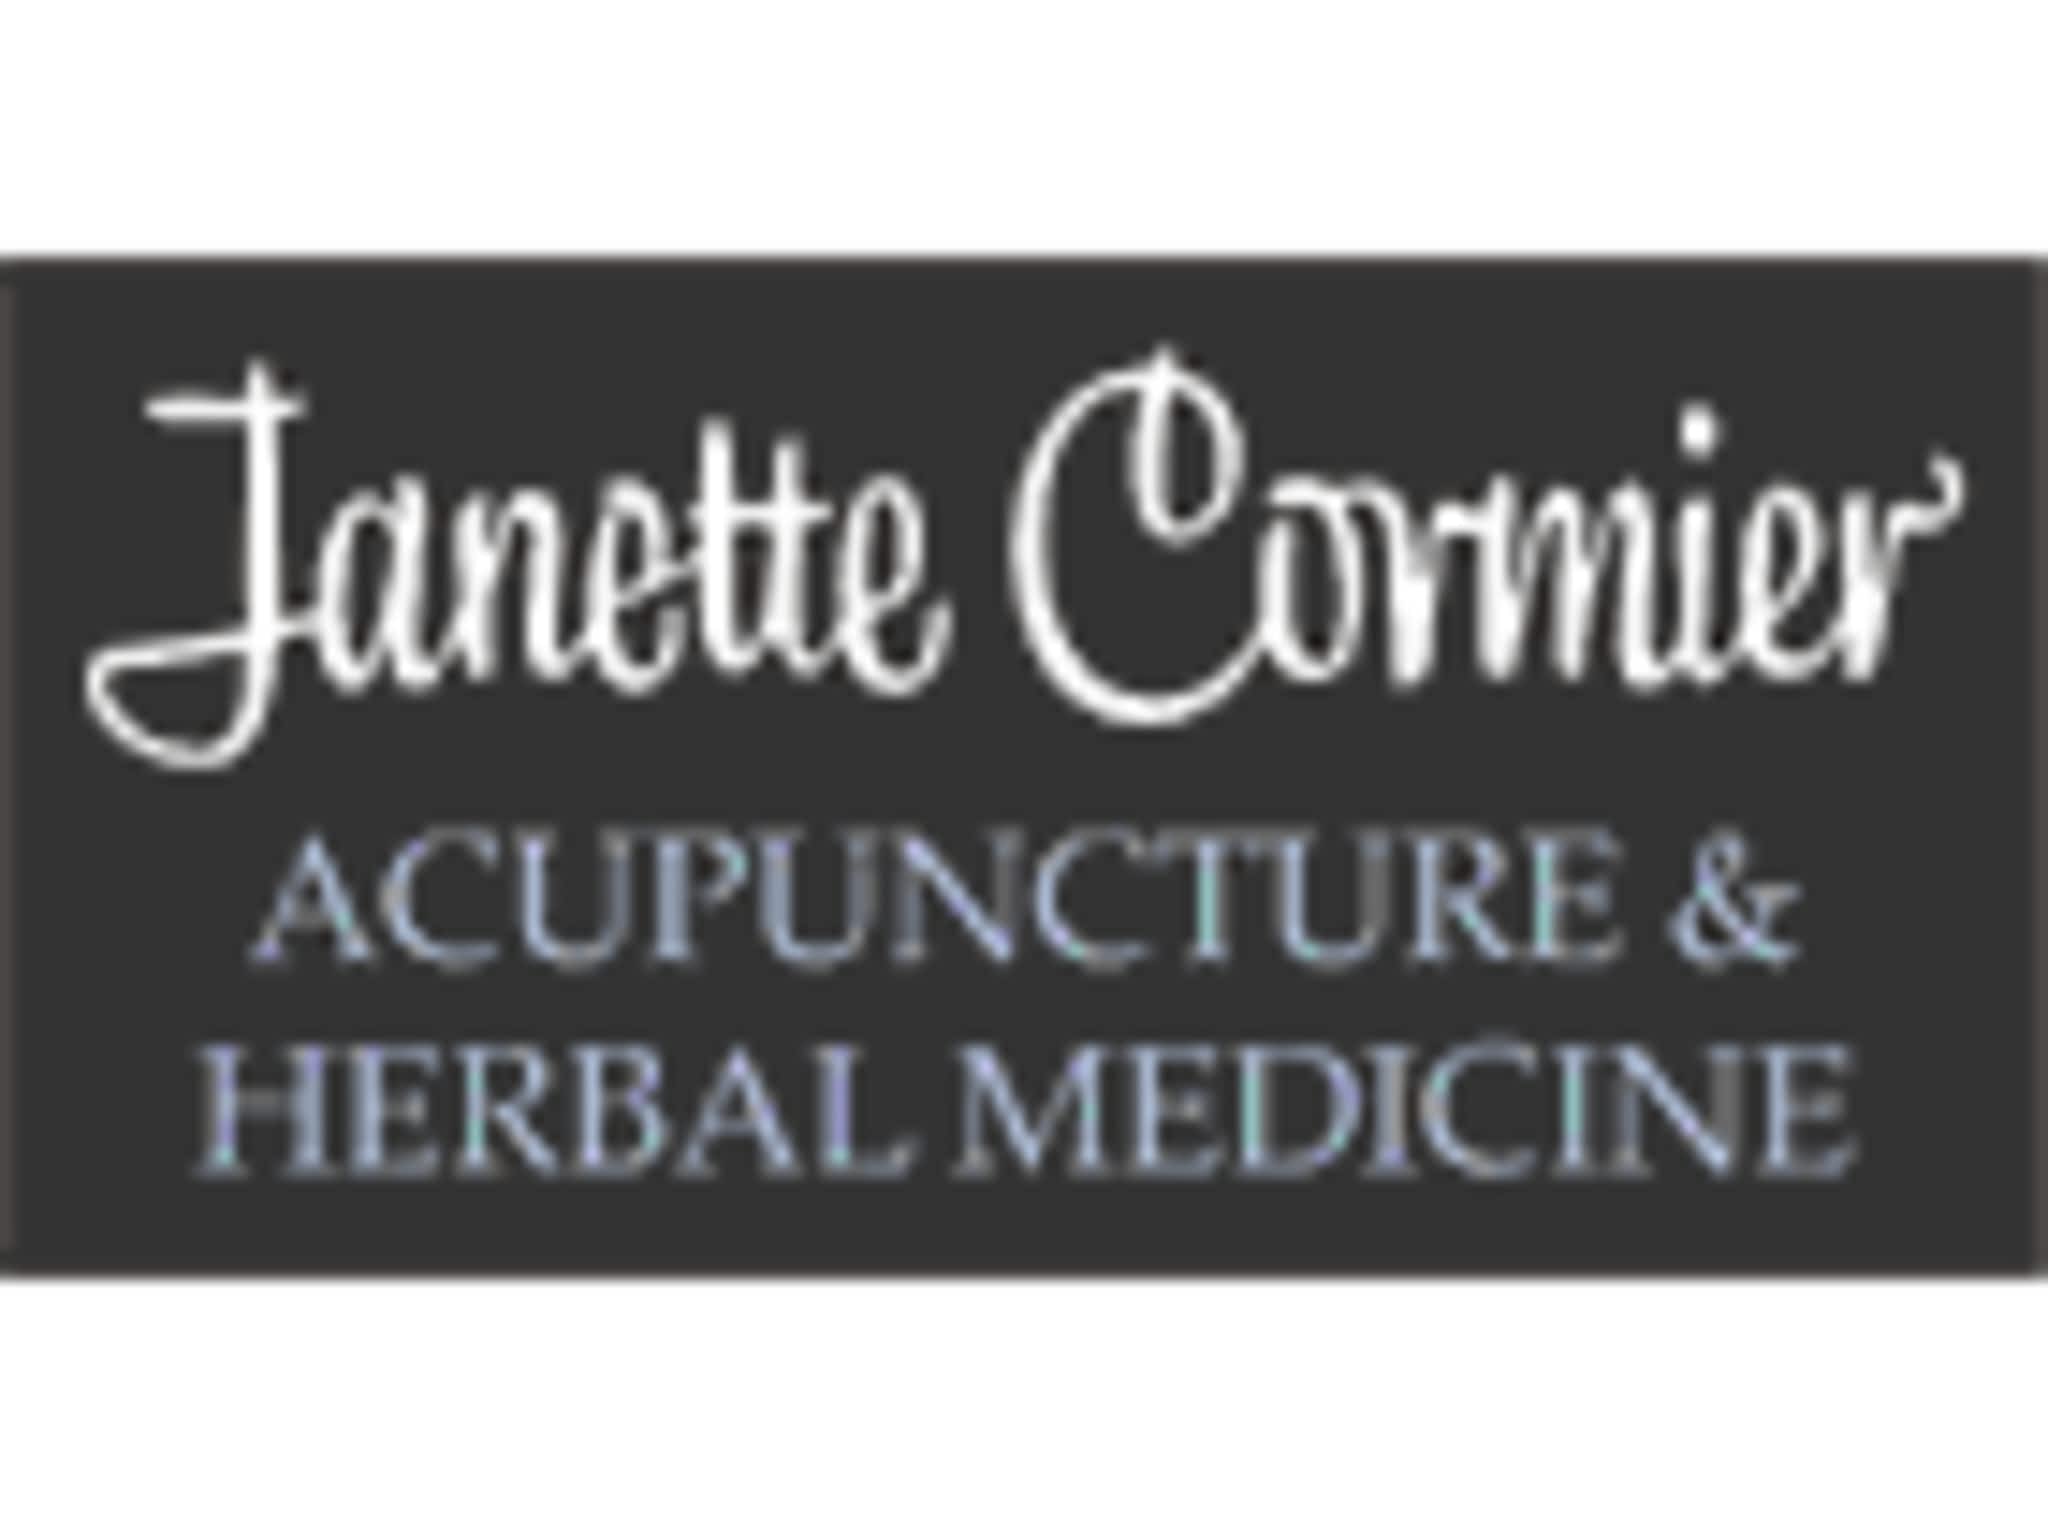 photo Janette Cormier - Acupuncture & Herbal Medicine